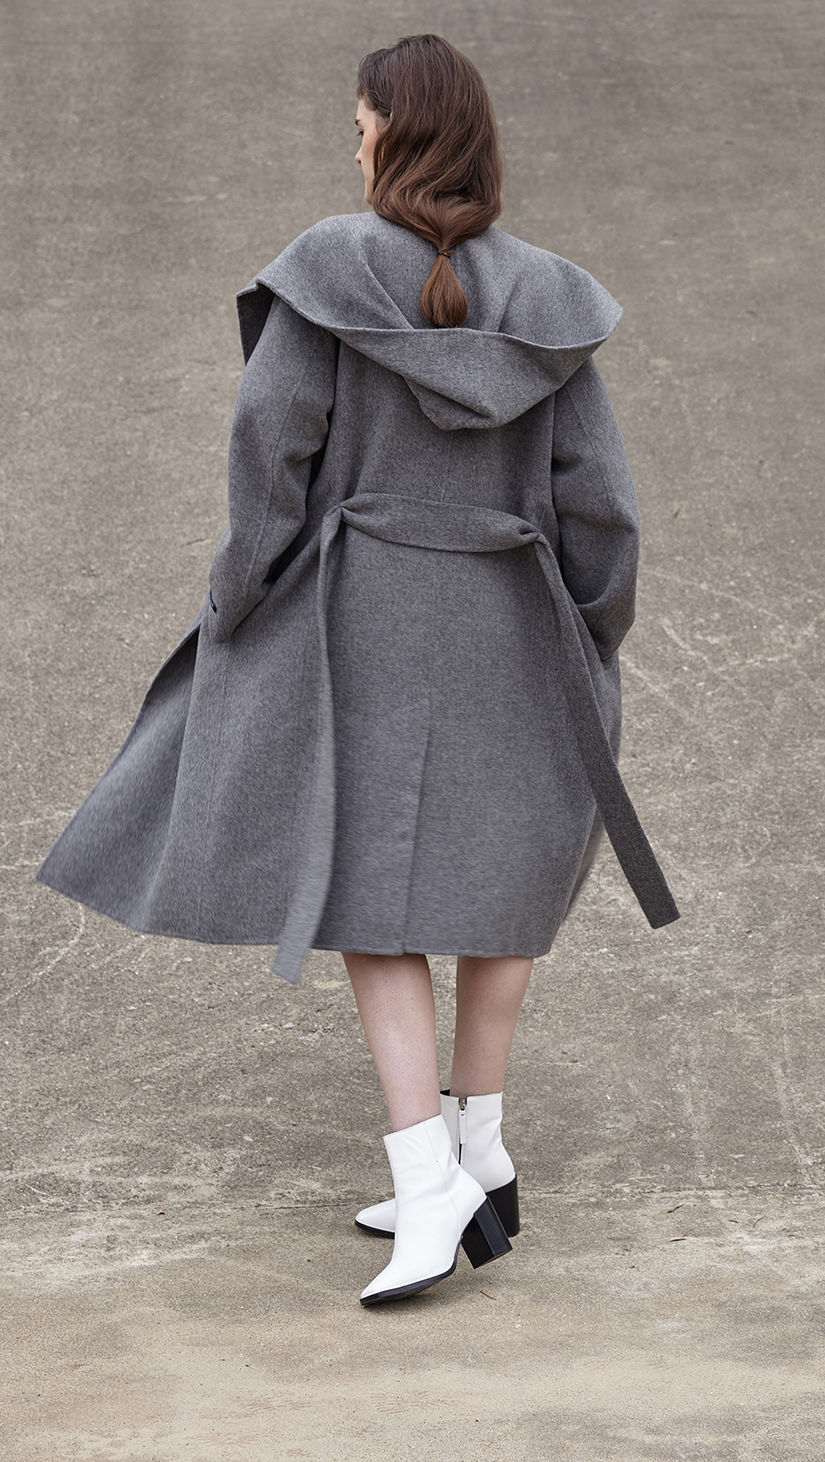 The Handmade Leevia Coat in grey. With a funnel collar, long sleeves, self-tie belt at natural waist. Side seam pockets, wide hoodie, belt loops. Oversized cut. Can be worn open or cinched. 